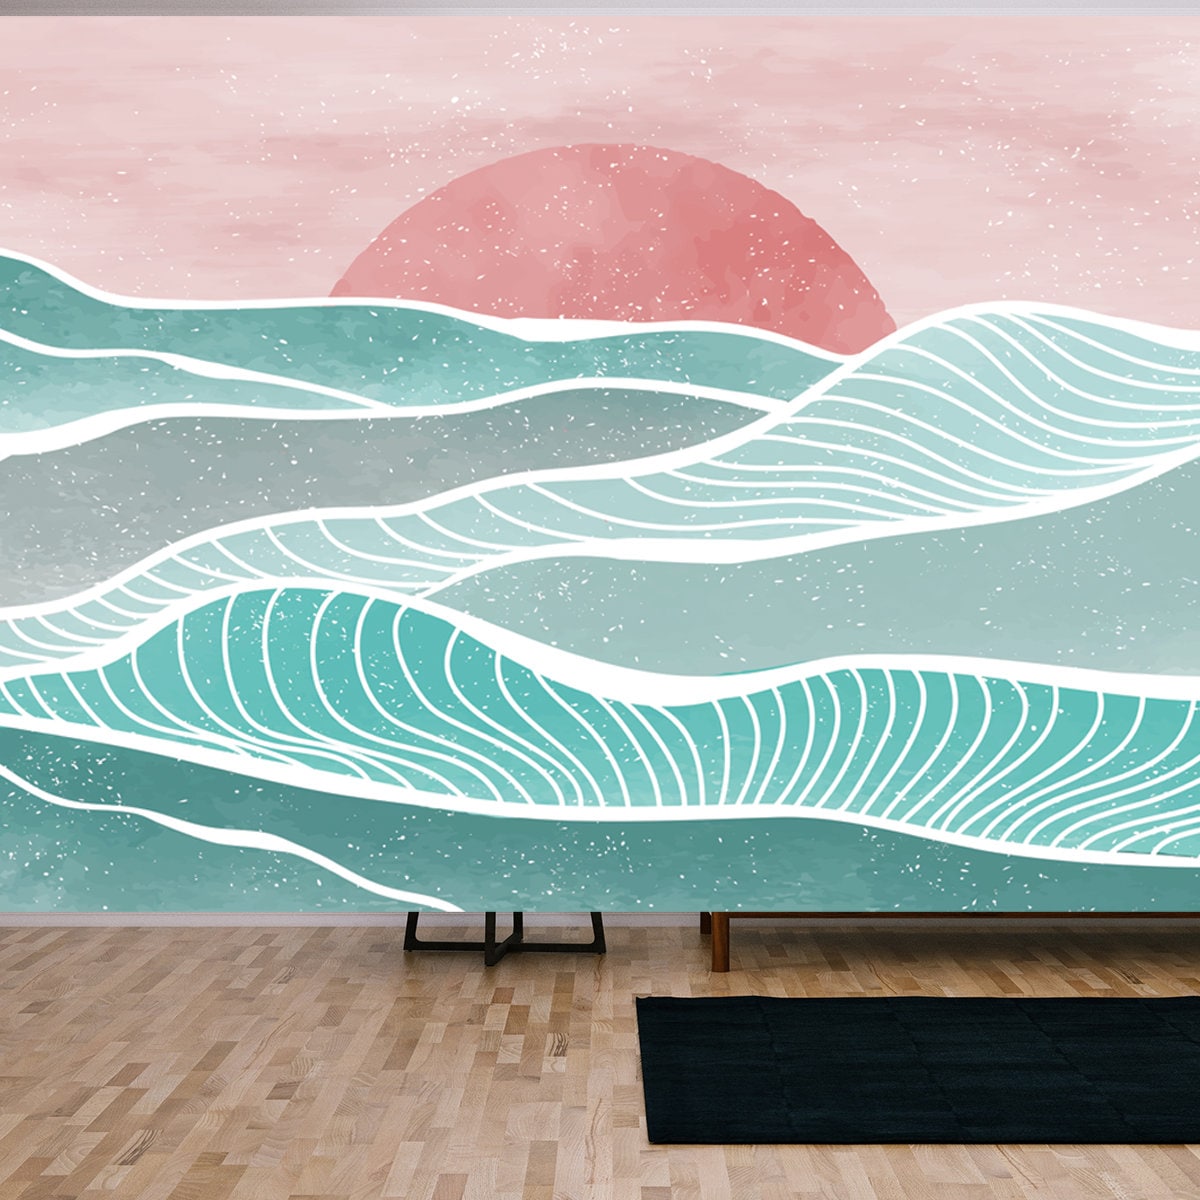 Creative Minimalist Modern Paint and Line Art. Abstract Ocean Wave and Mountain Contemporary Aesthetic Backgrounds Landscapes Mural